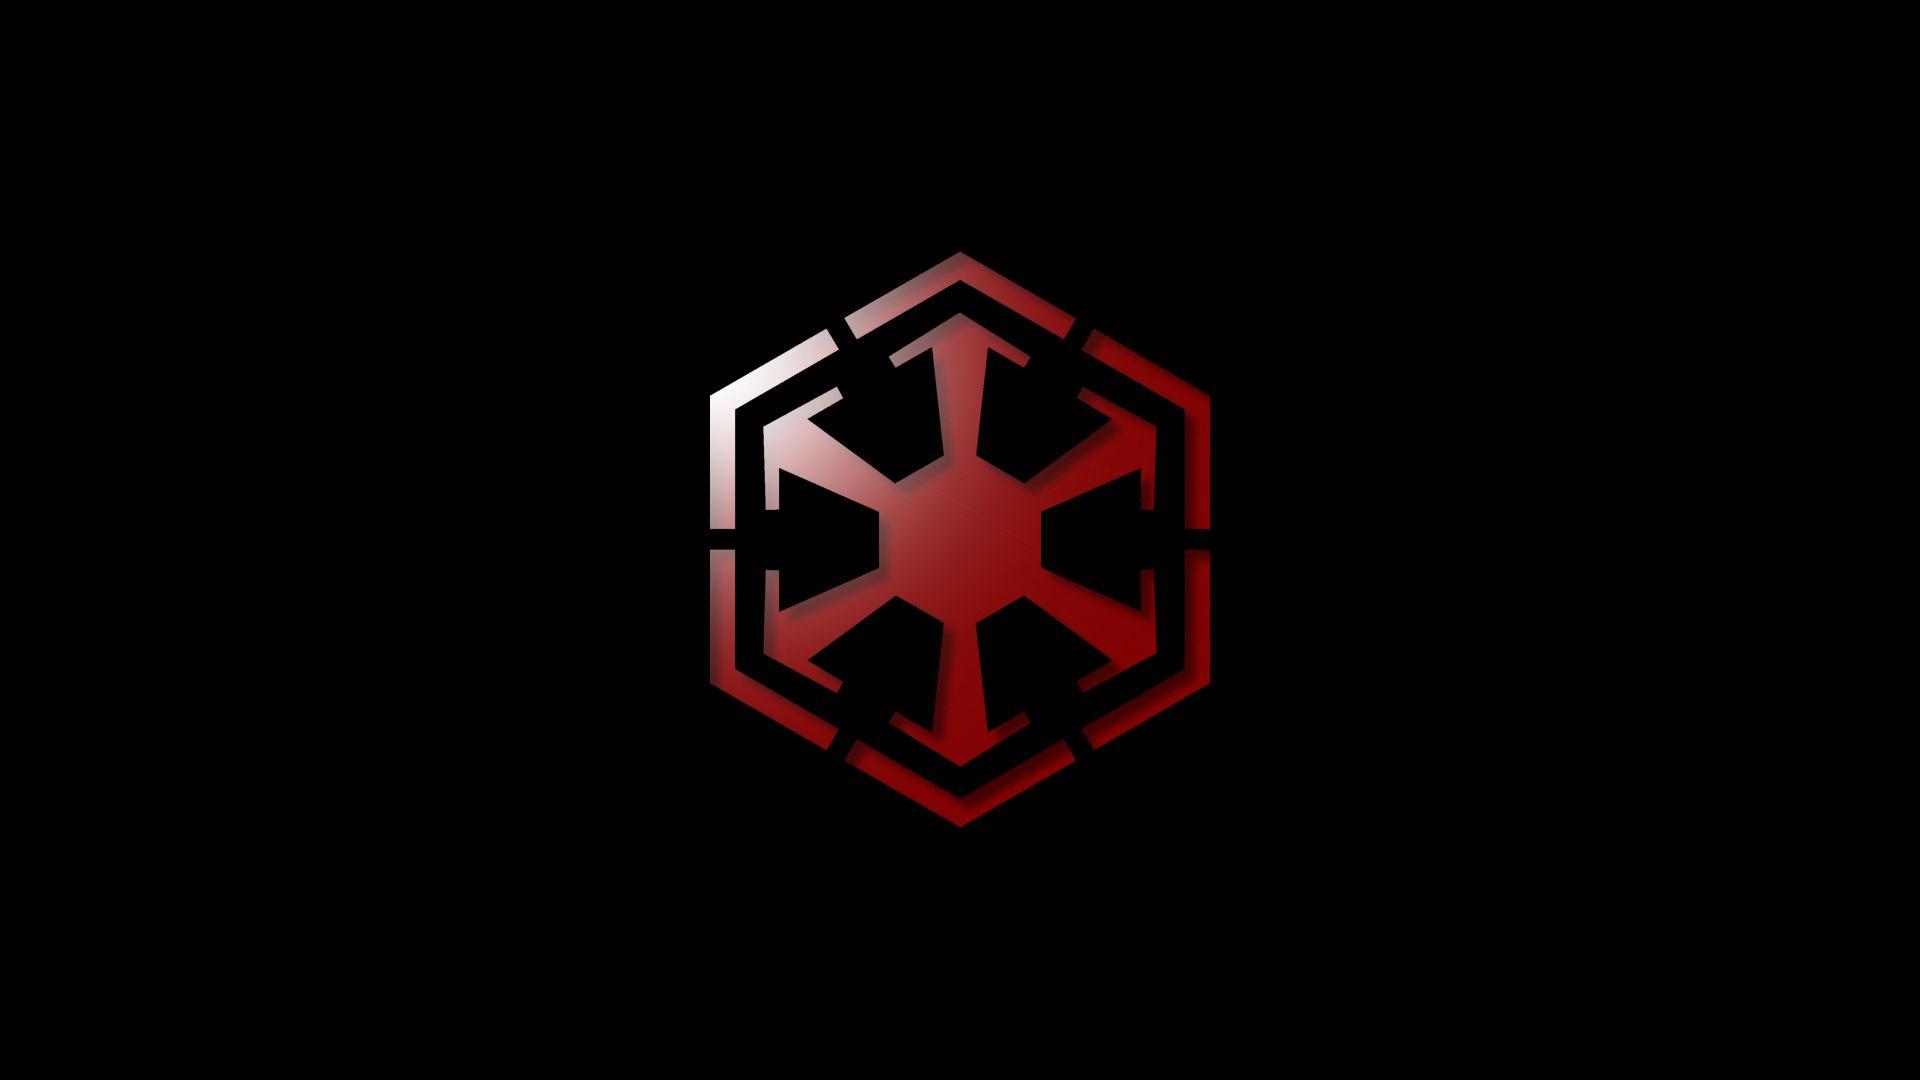 The Simple SWTOR Sith Wallpaper